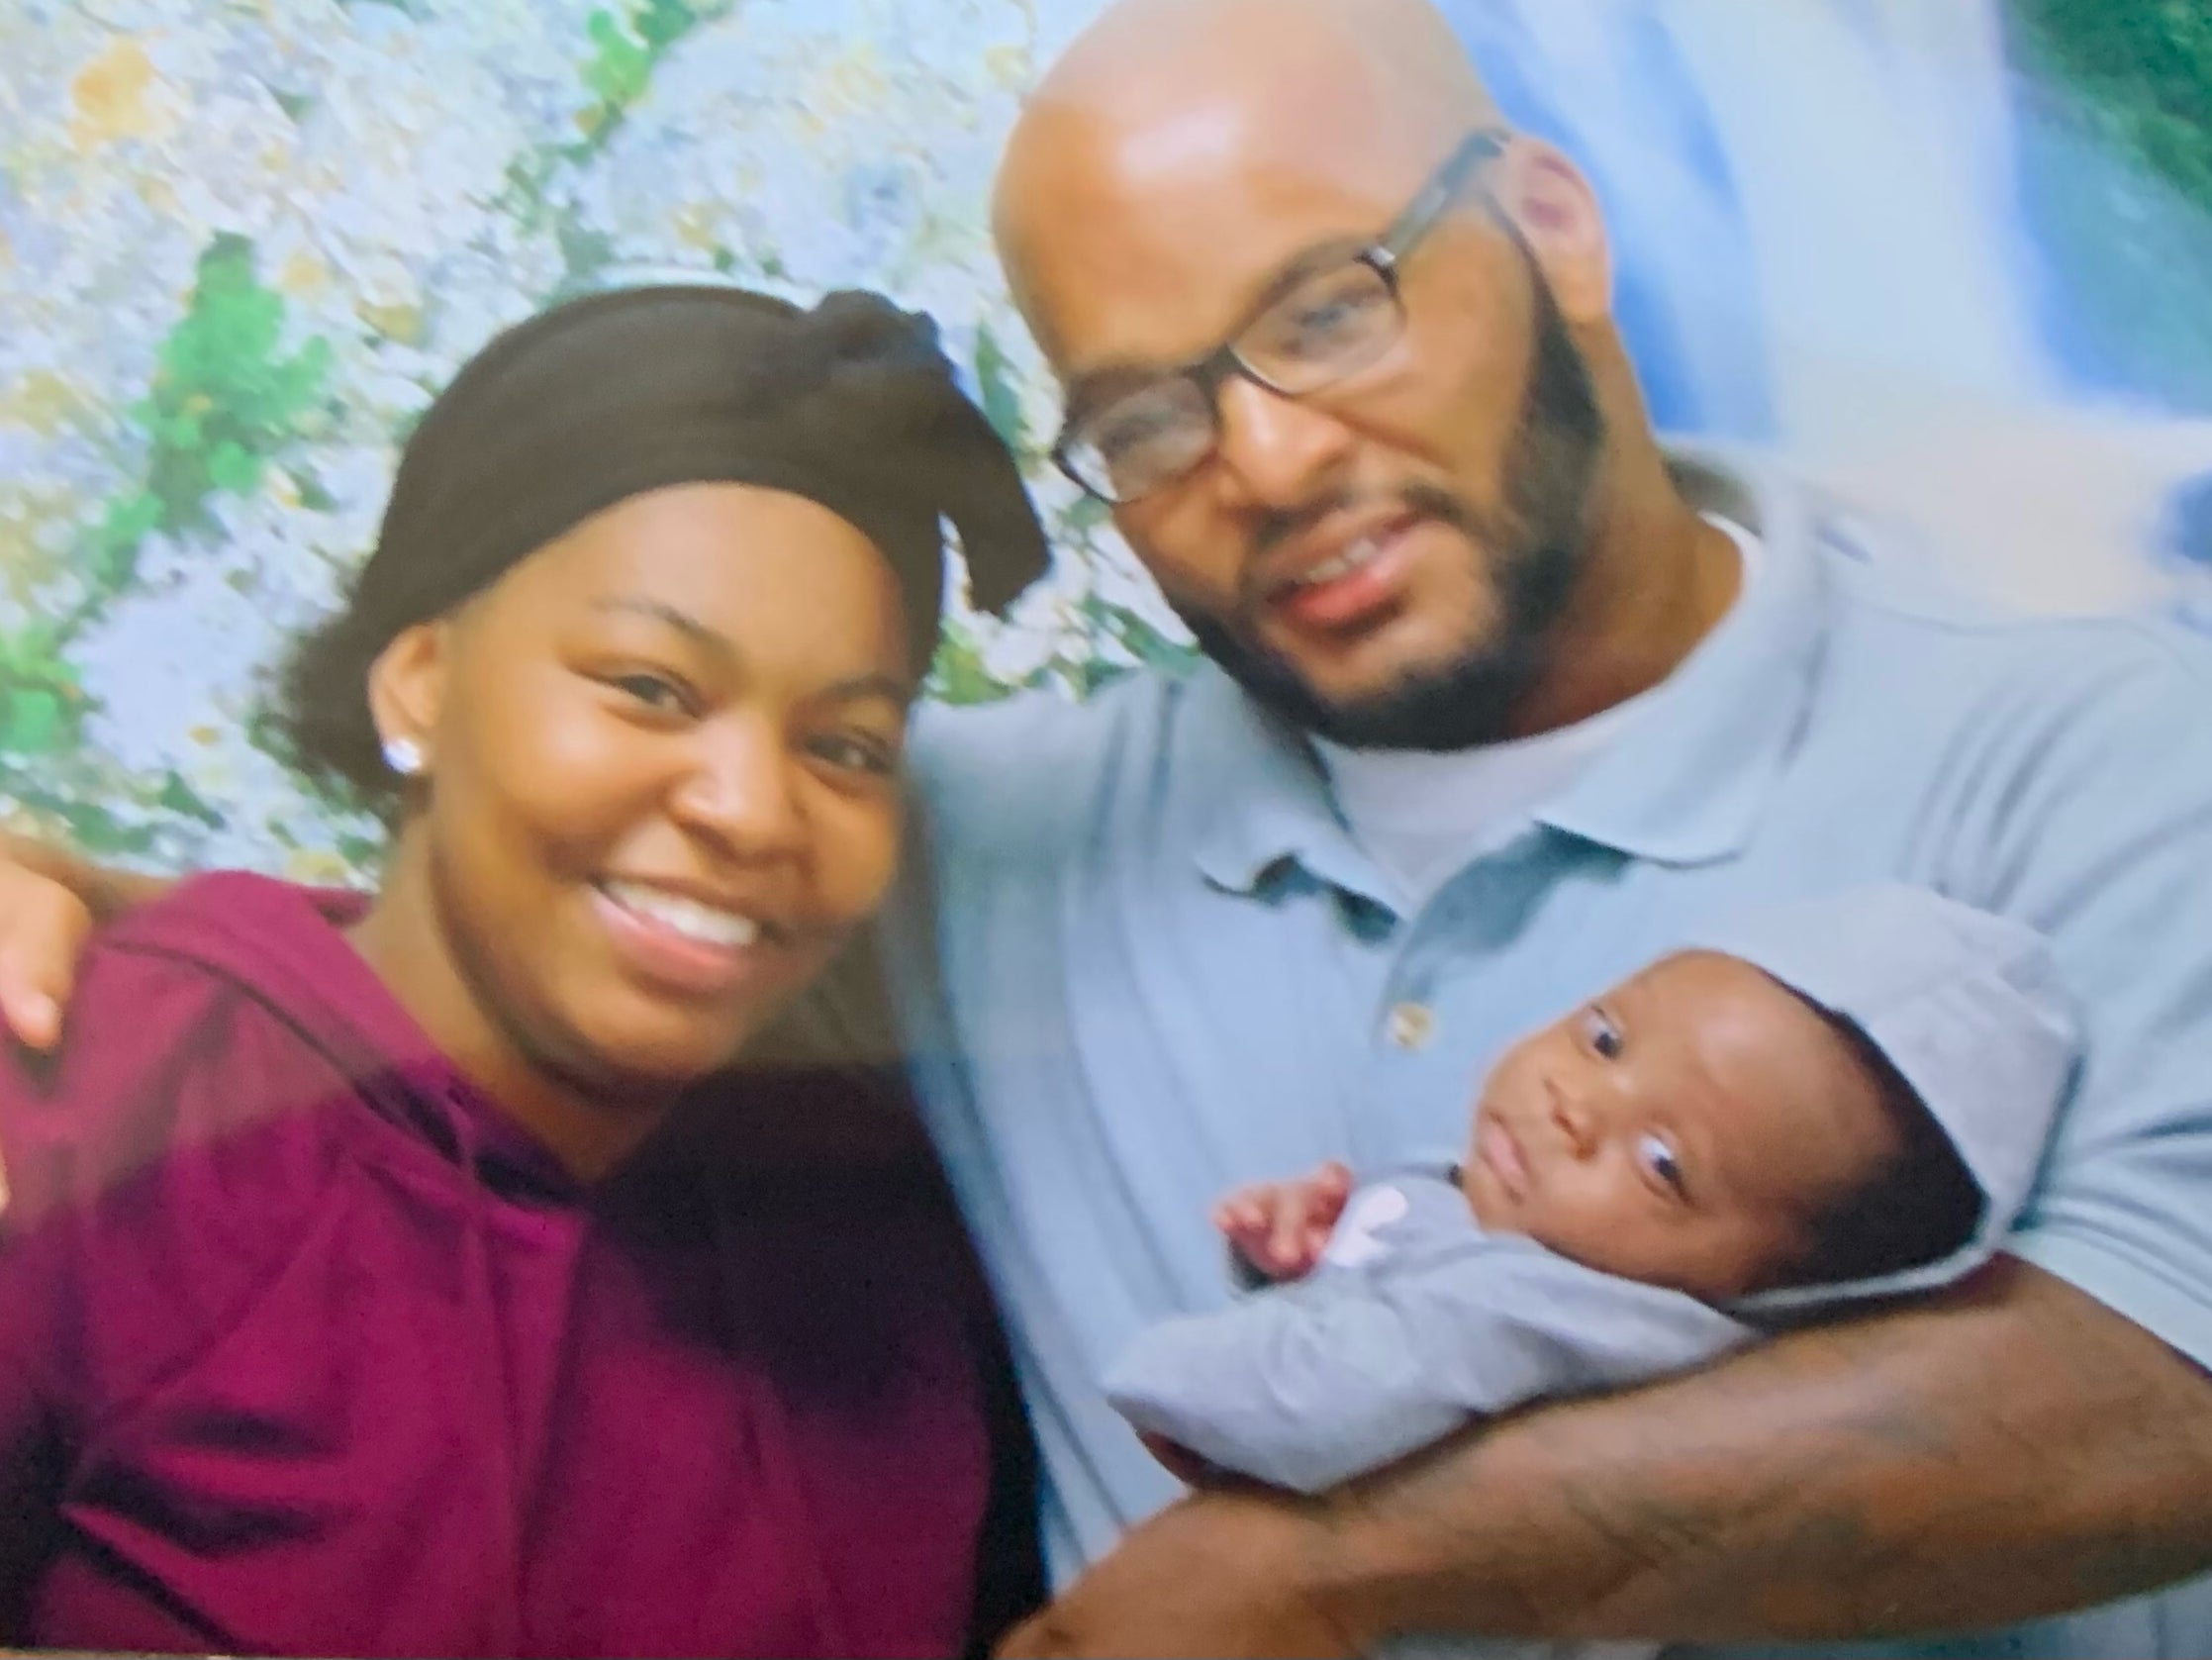 Kevin Johnson, 37, with his daughter Khorry Ramey, 19, and grandchild before he was executed on Tuesday